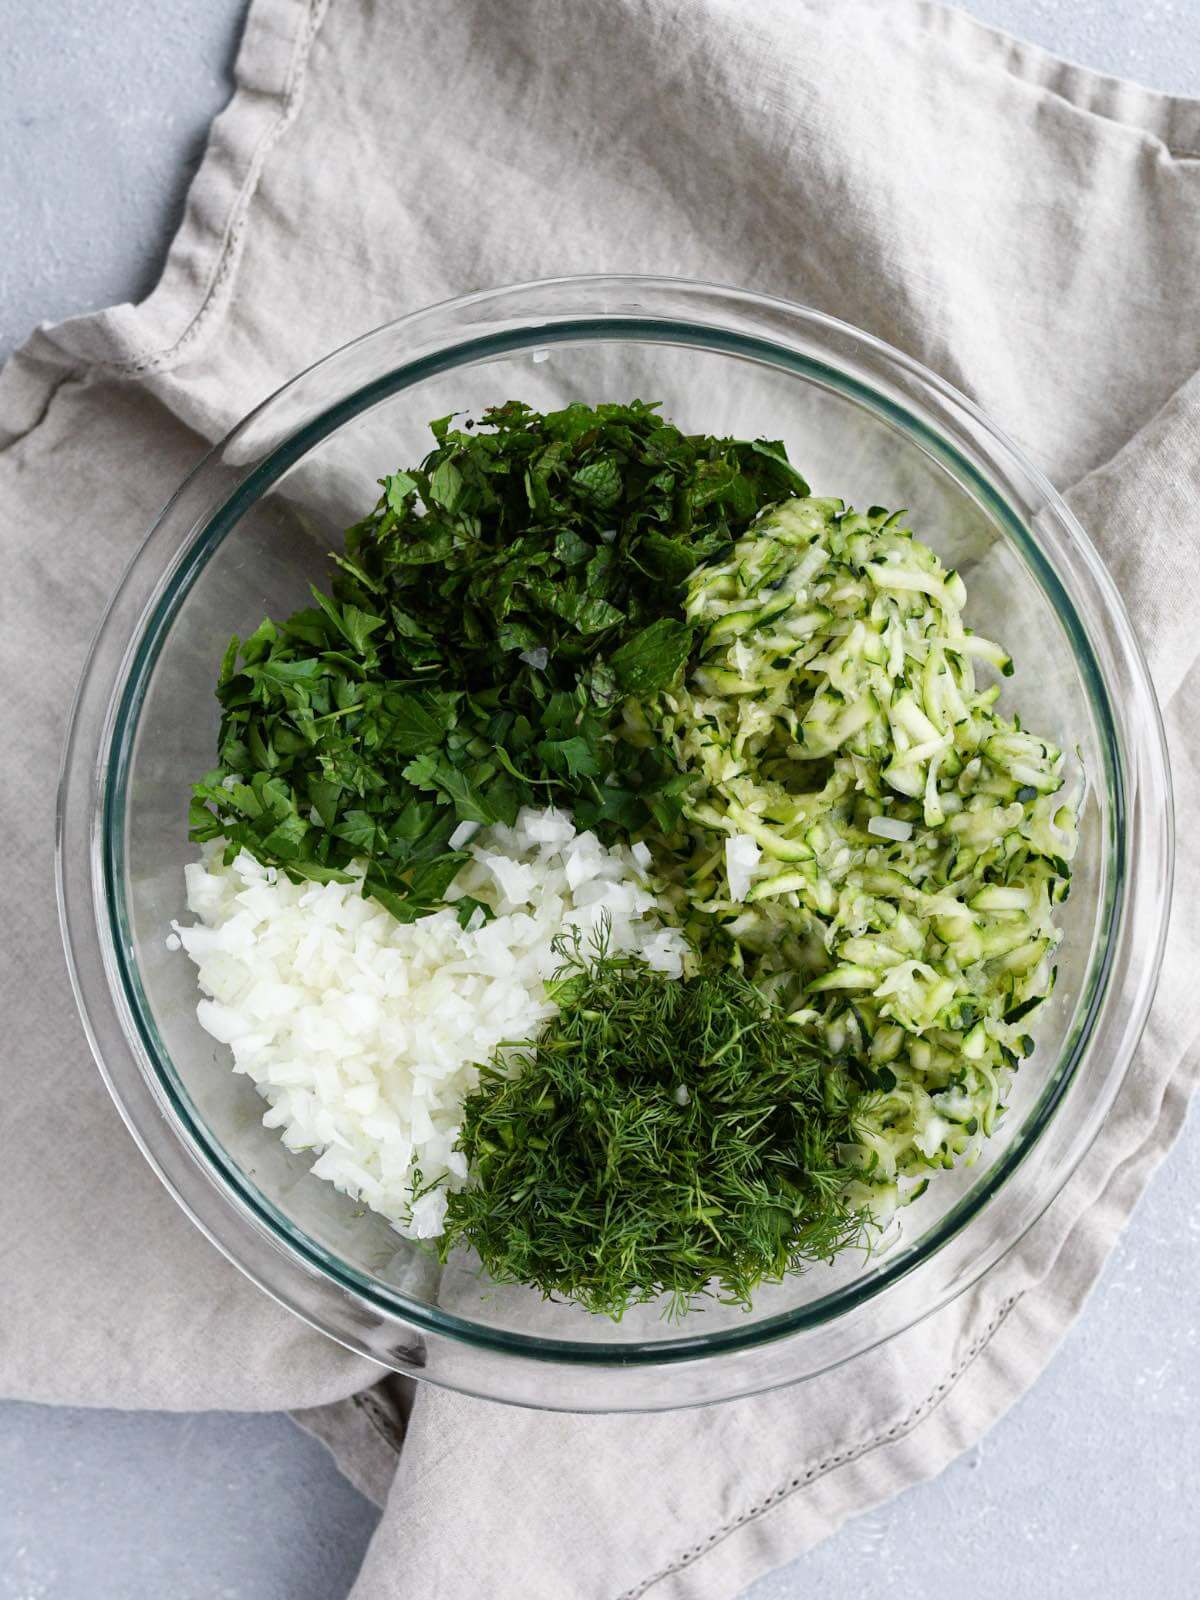 diced parsley, mint, onions, grated zucchini, and dill in a large glass bowl.